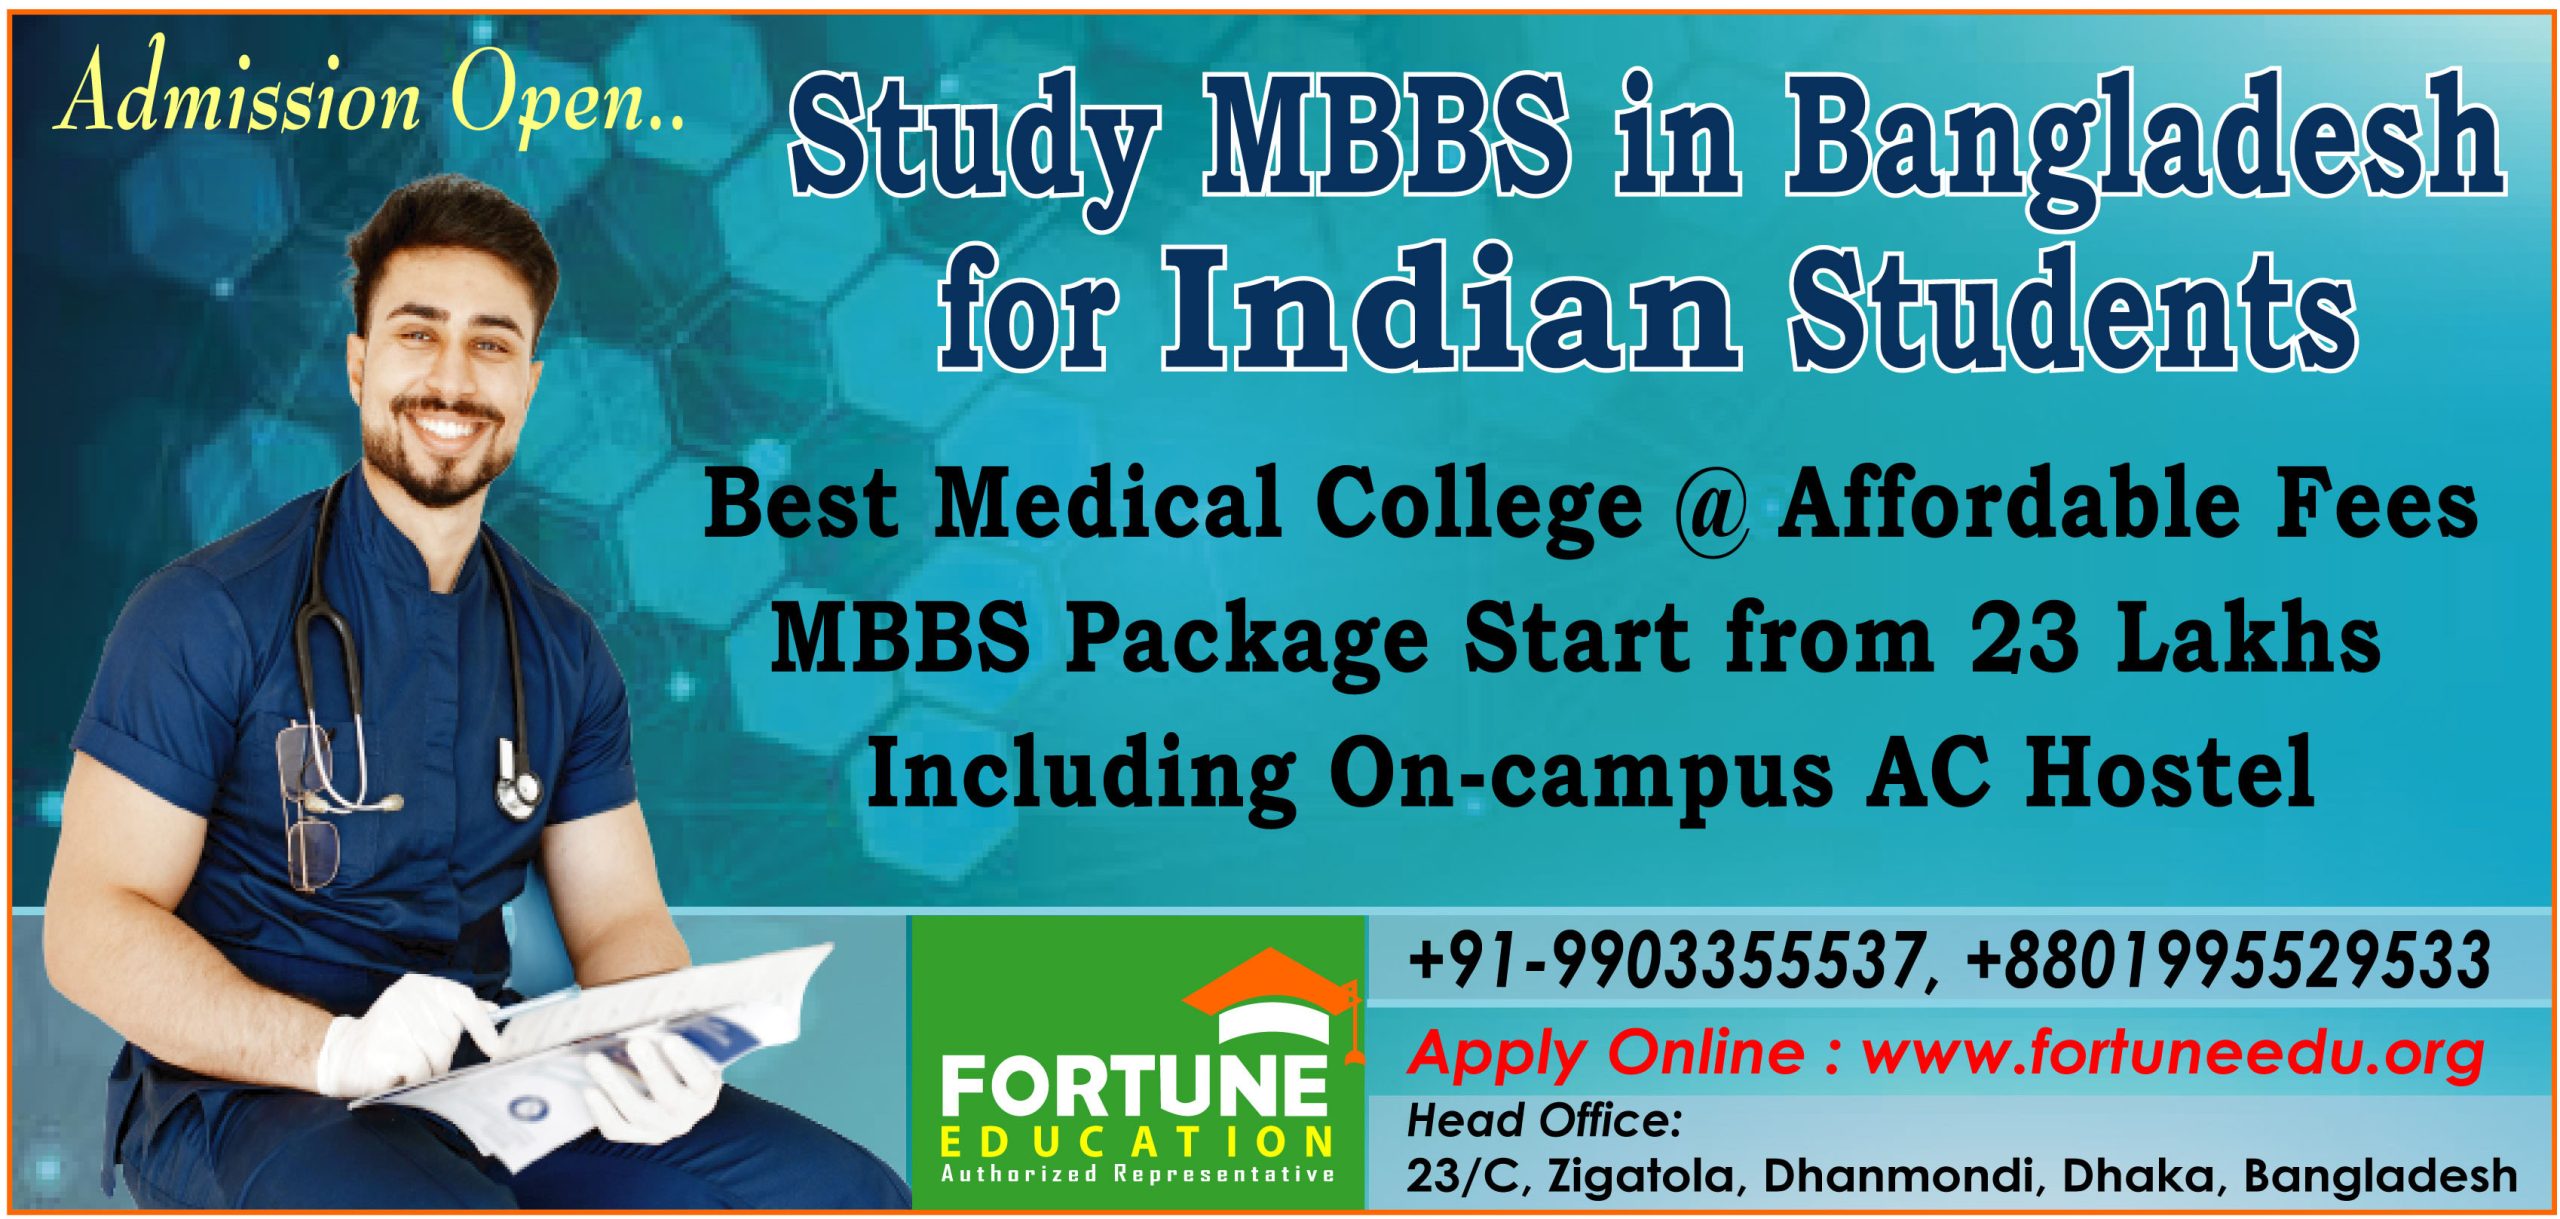 Eligibility of MBBS Admission in Bangladesh